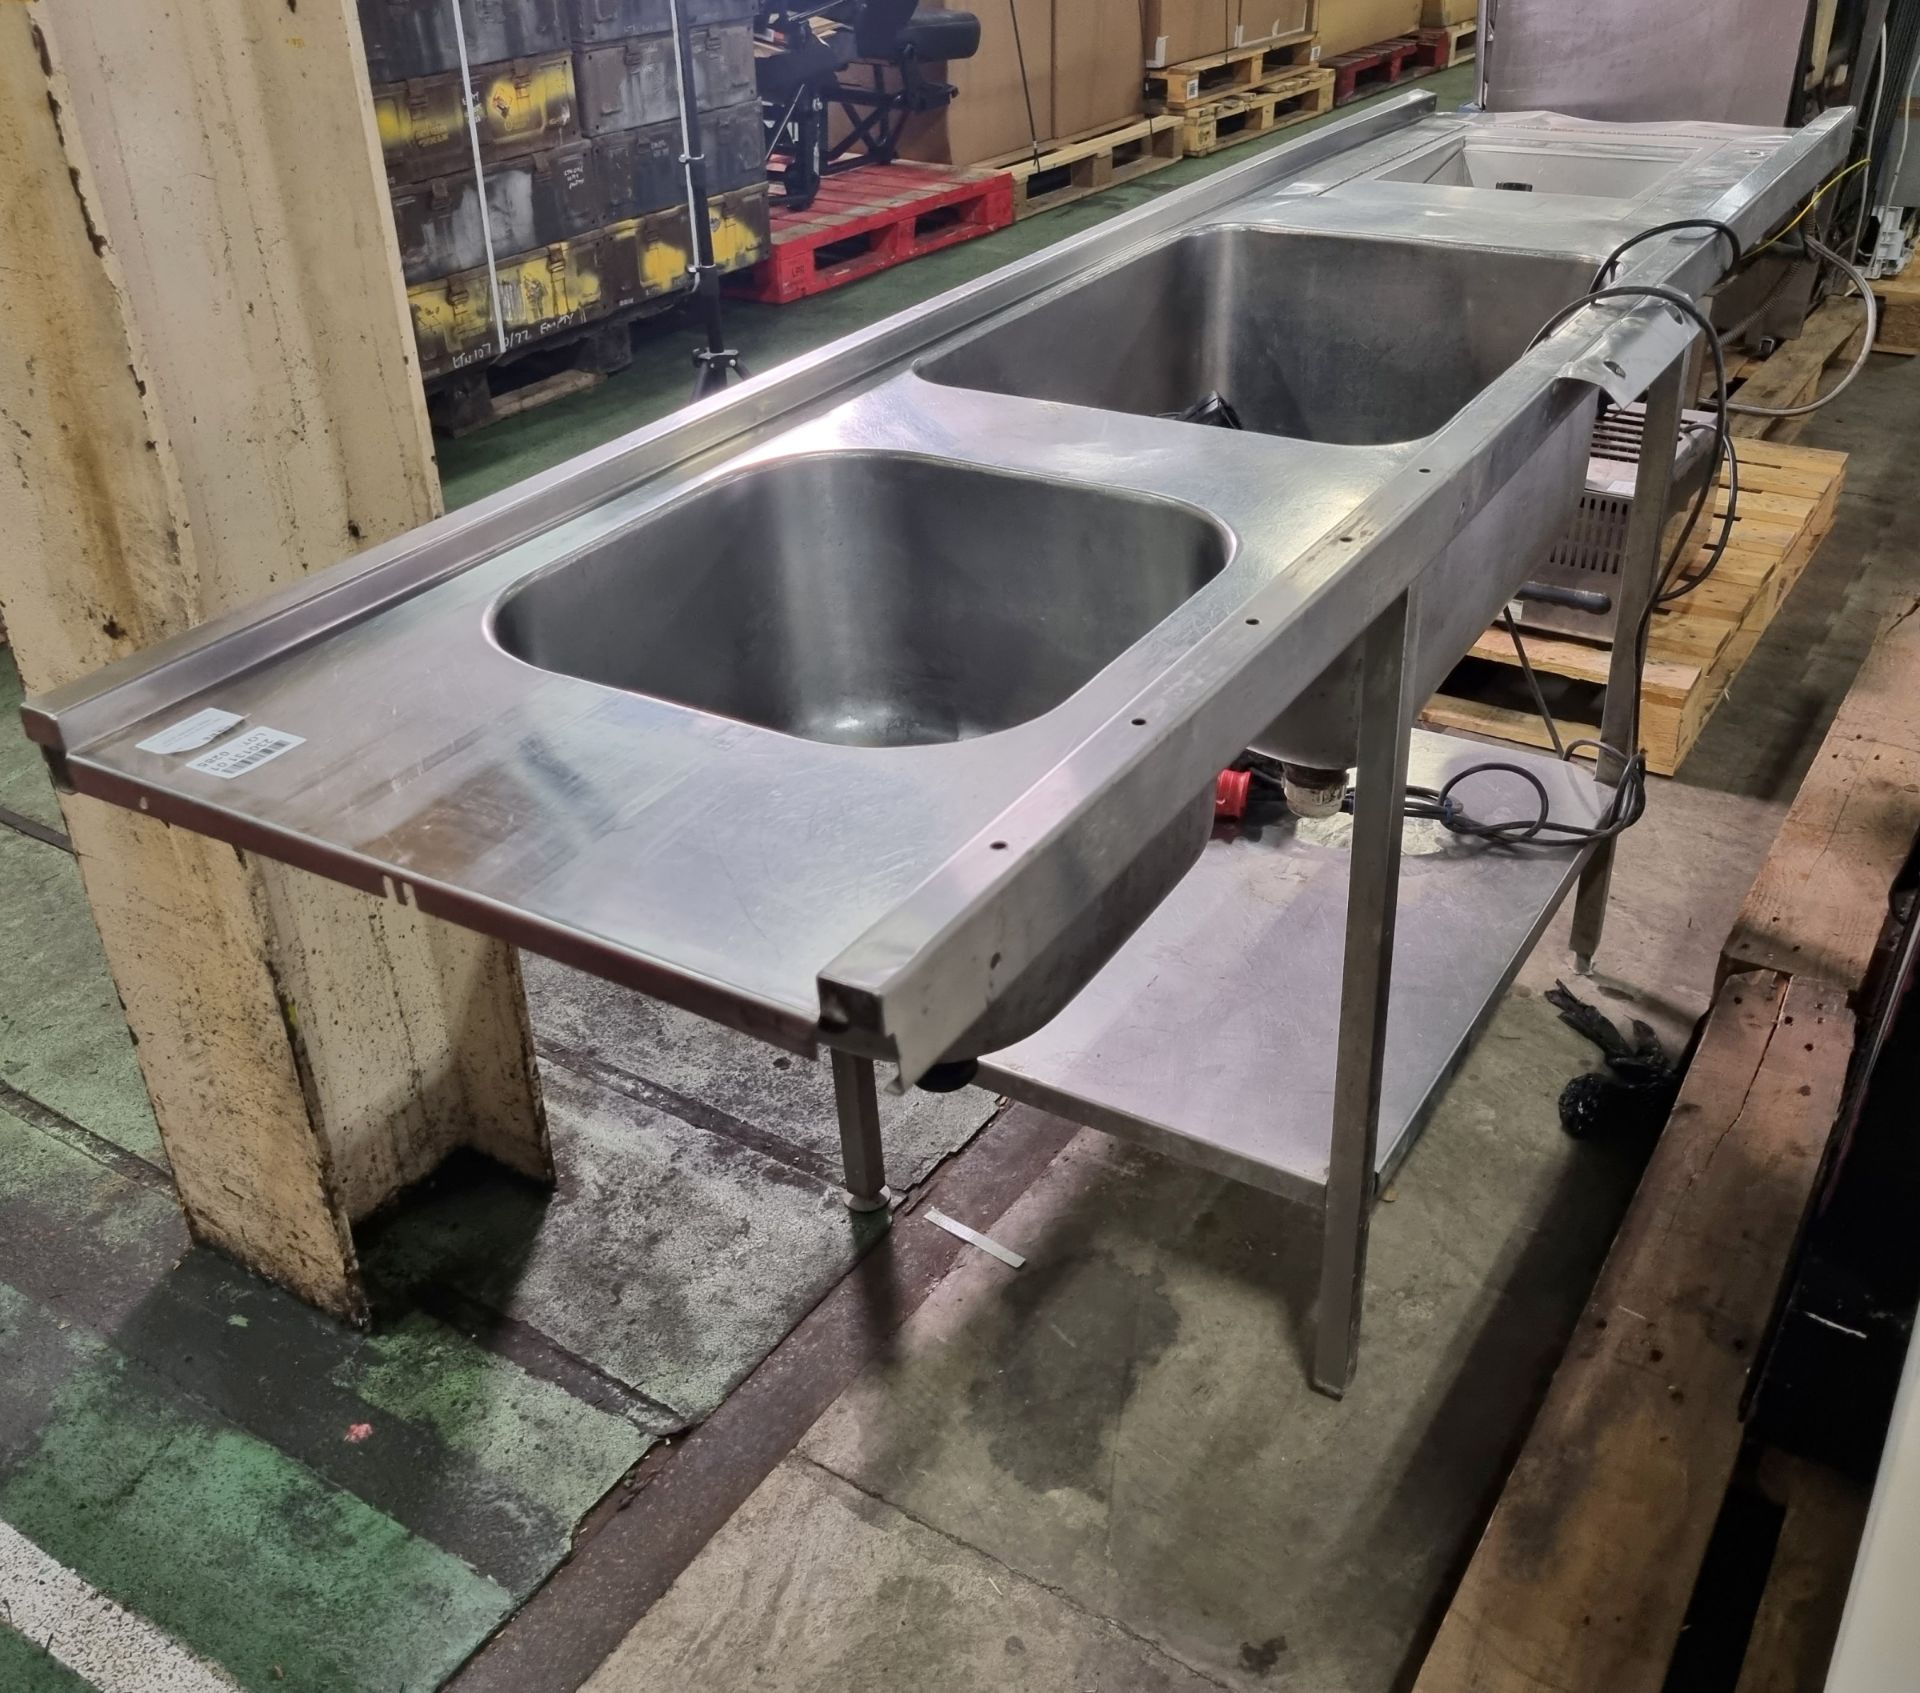 Stainless steel double sink unit with waste disposal shoot (5 pin connector for motor) - Image 3 of 7